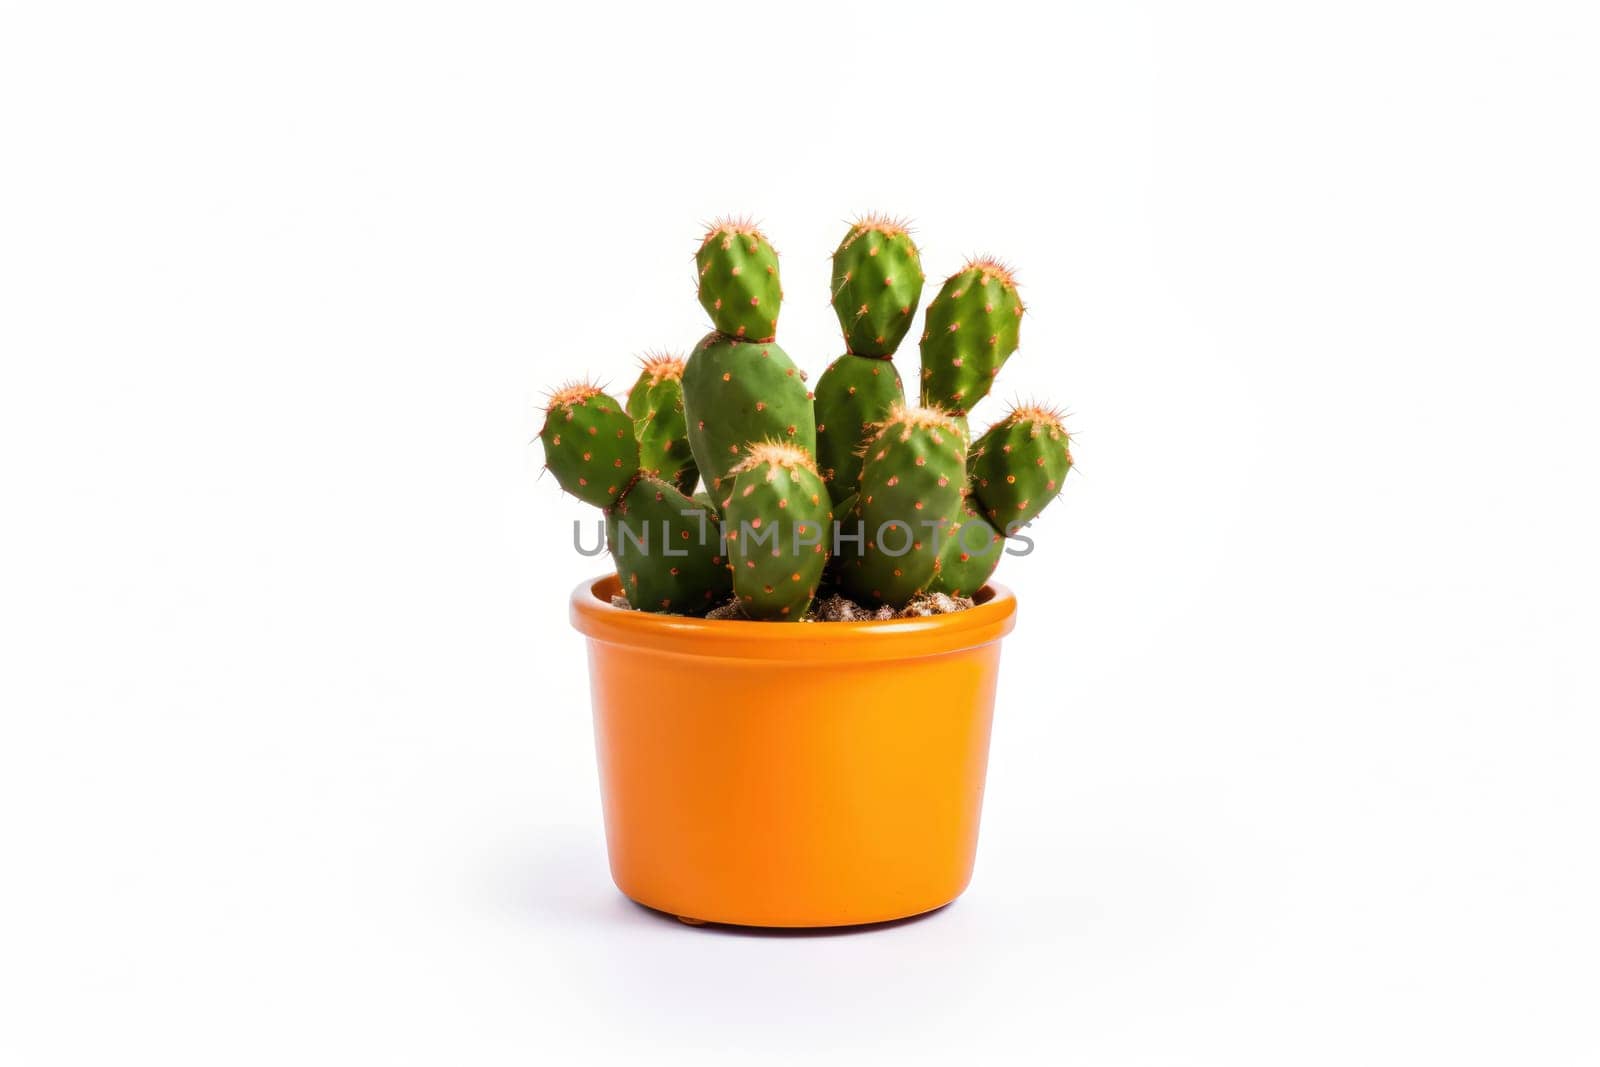 cactus in a vase isolated on white background by Ramanouskaya